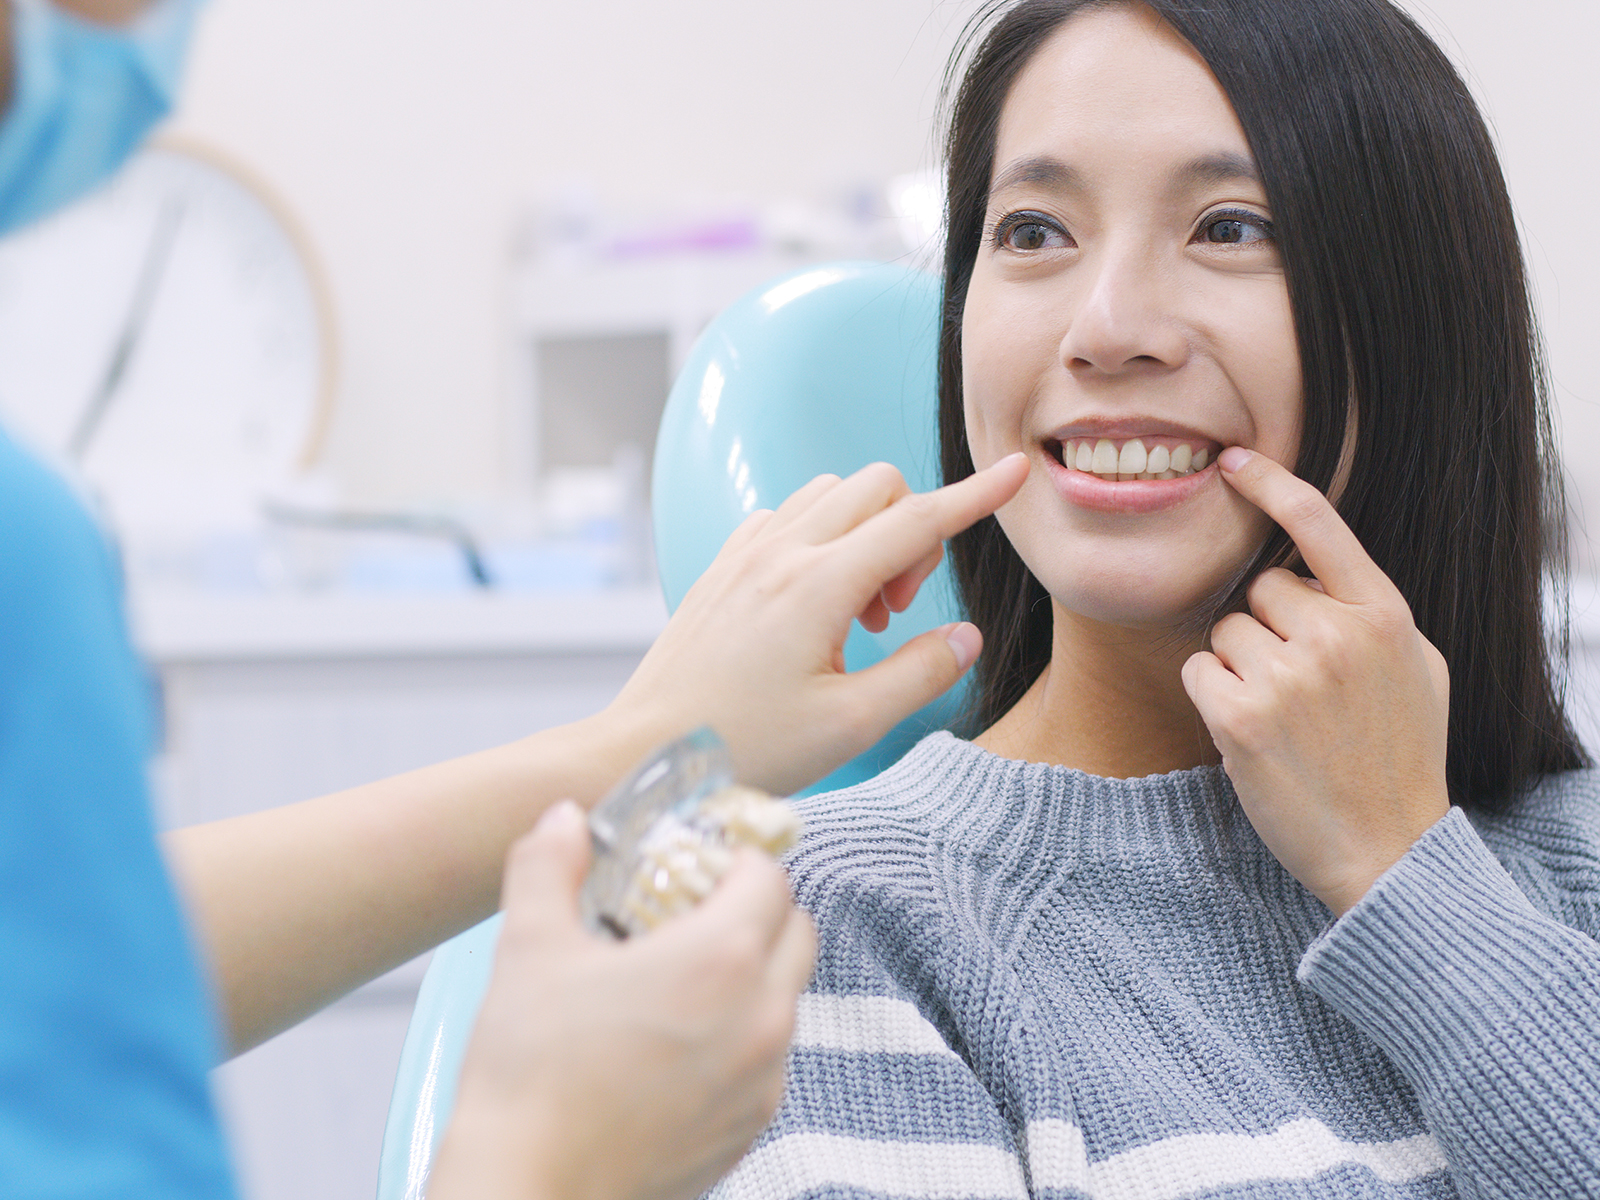 What Do You Need To Know About Dental Crowns?